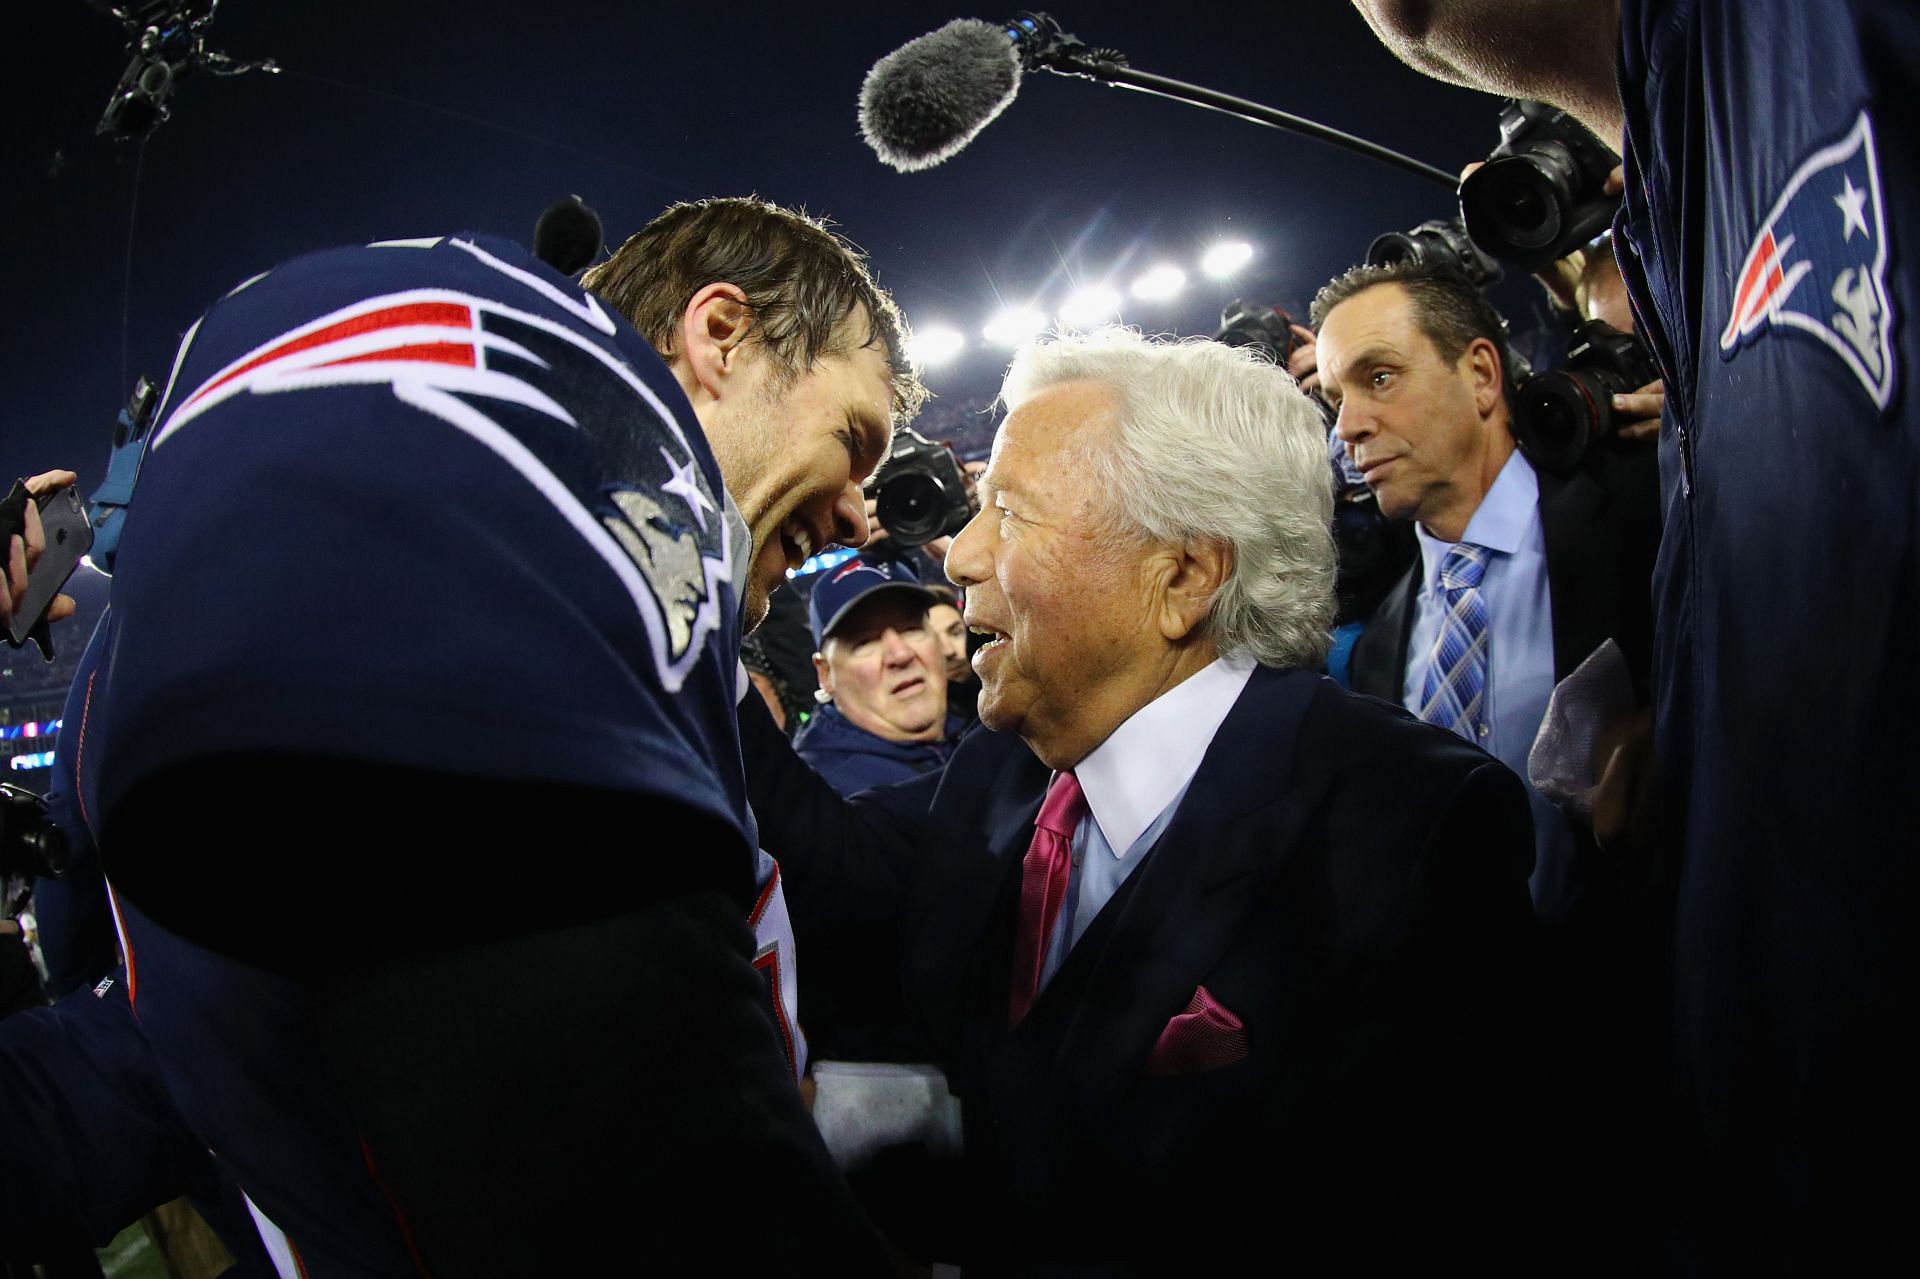 Tom Brady will need owner approval to return